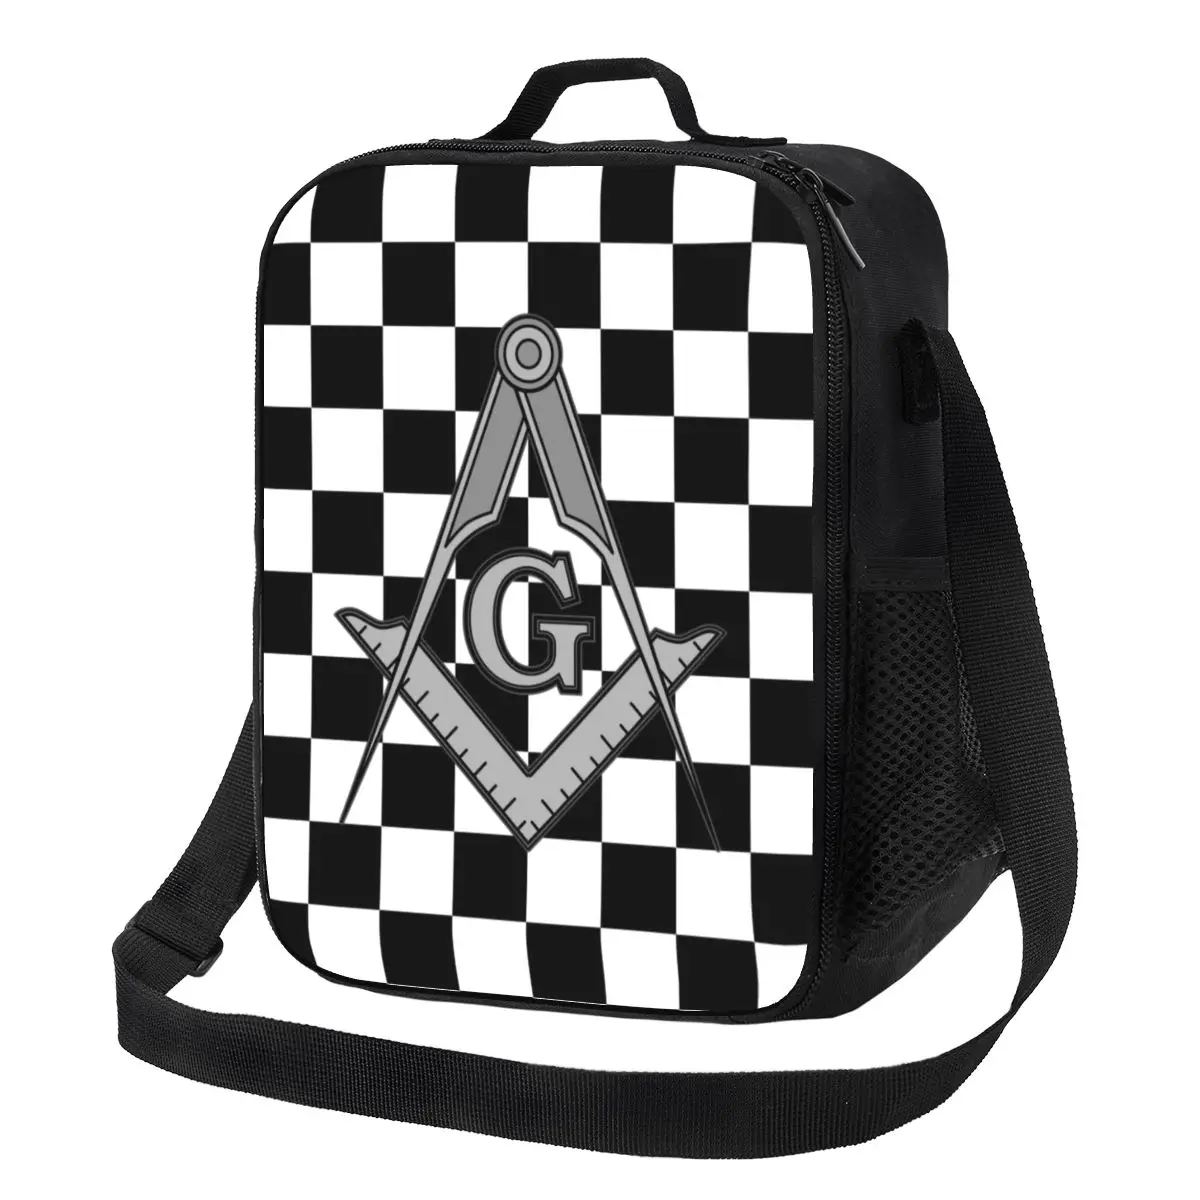 

Custom Freemason Square And Compass Masonic Lunch Bag Men Women Thermal Cooler Insulated Lunch Boxes for Kids School Children